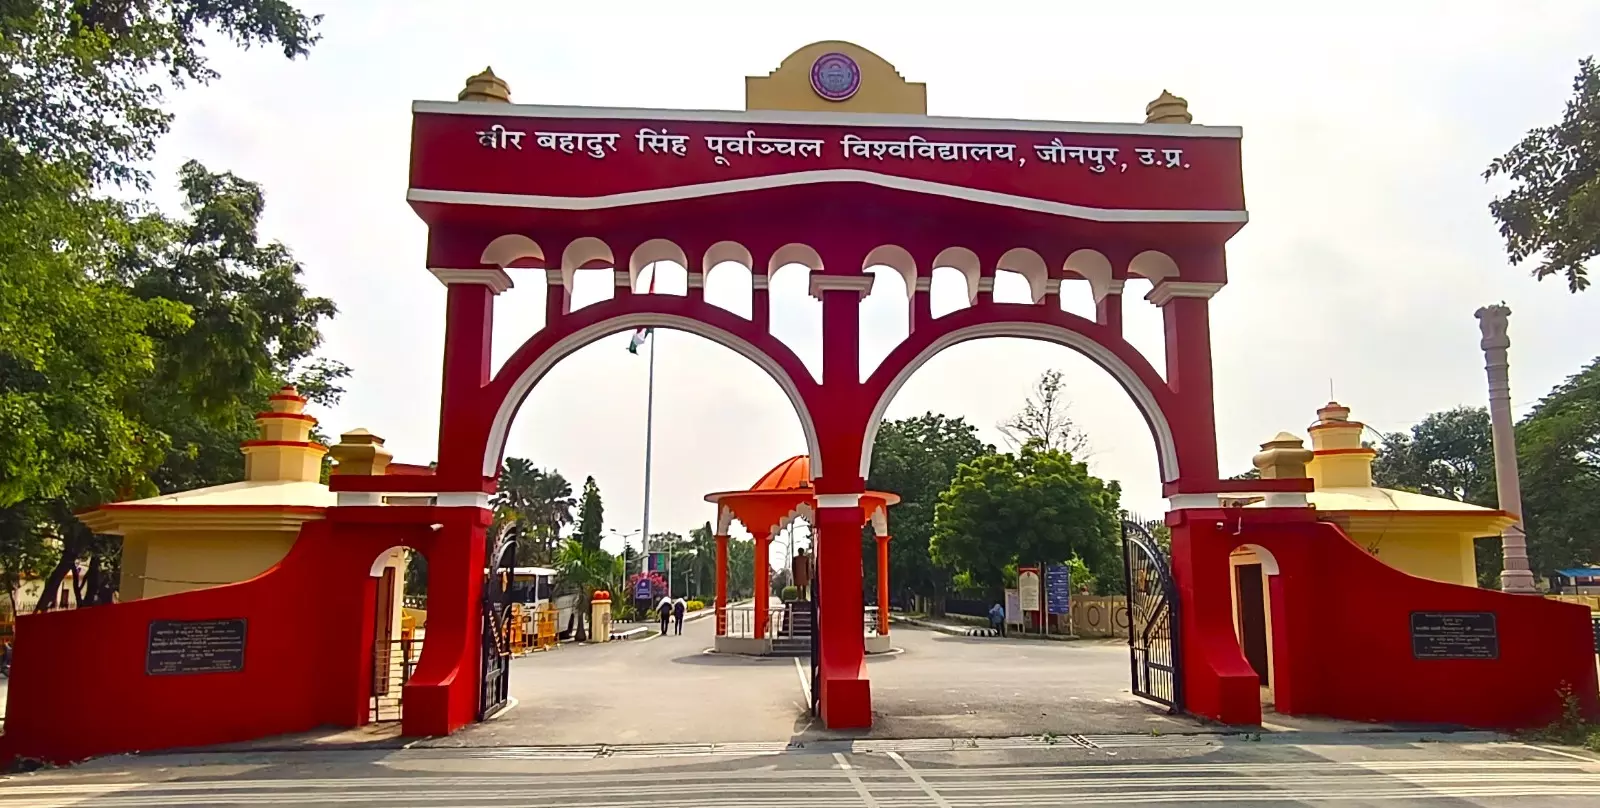 Jai Shri Ram becomes a ticket to clearing exams in UP varsity, professors suspended